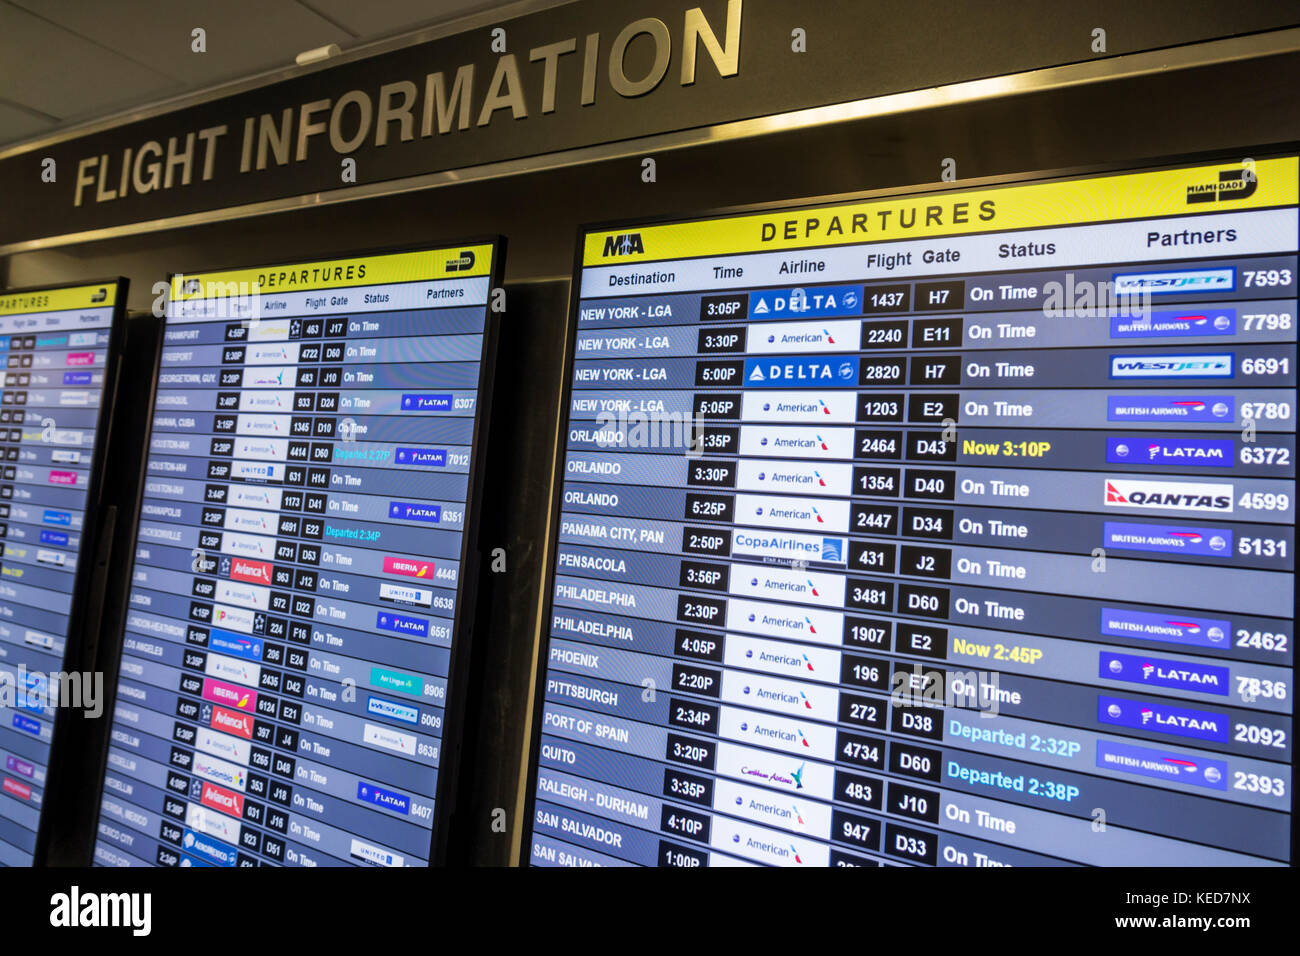 Departures Monitor High Resolution Stock Photography and Images - Alamy